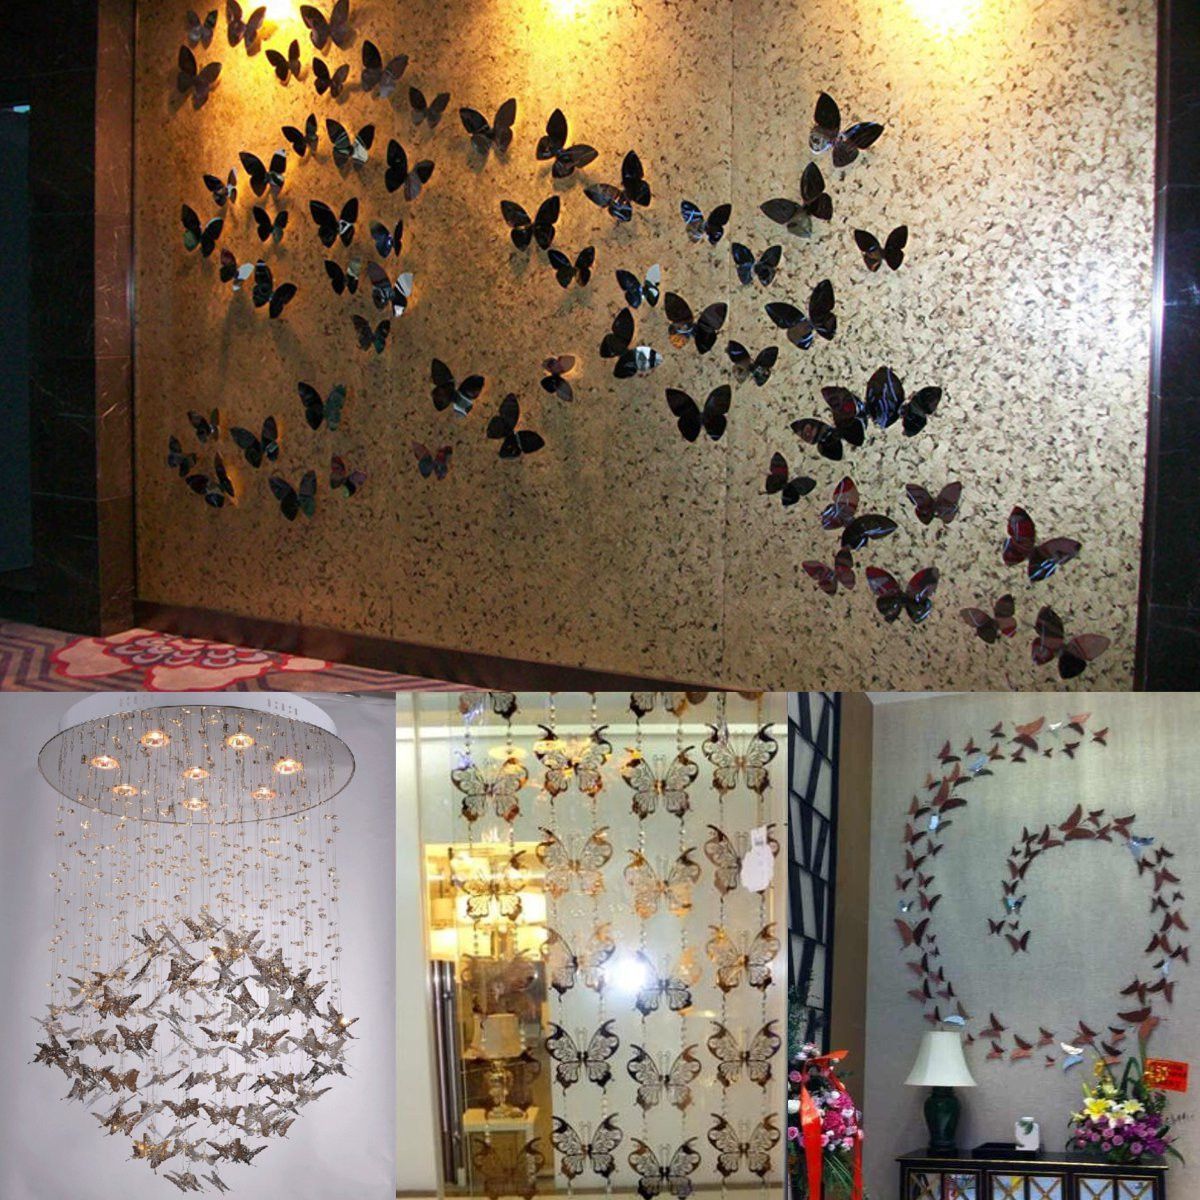 10Pcs-3D-Stainless-Butterfly-Wall-Stickers-Silver-Mirror-Decals-Mural-Home-Decorations-1153831